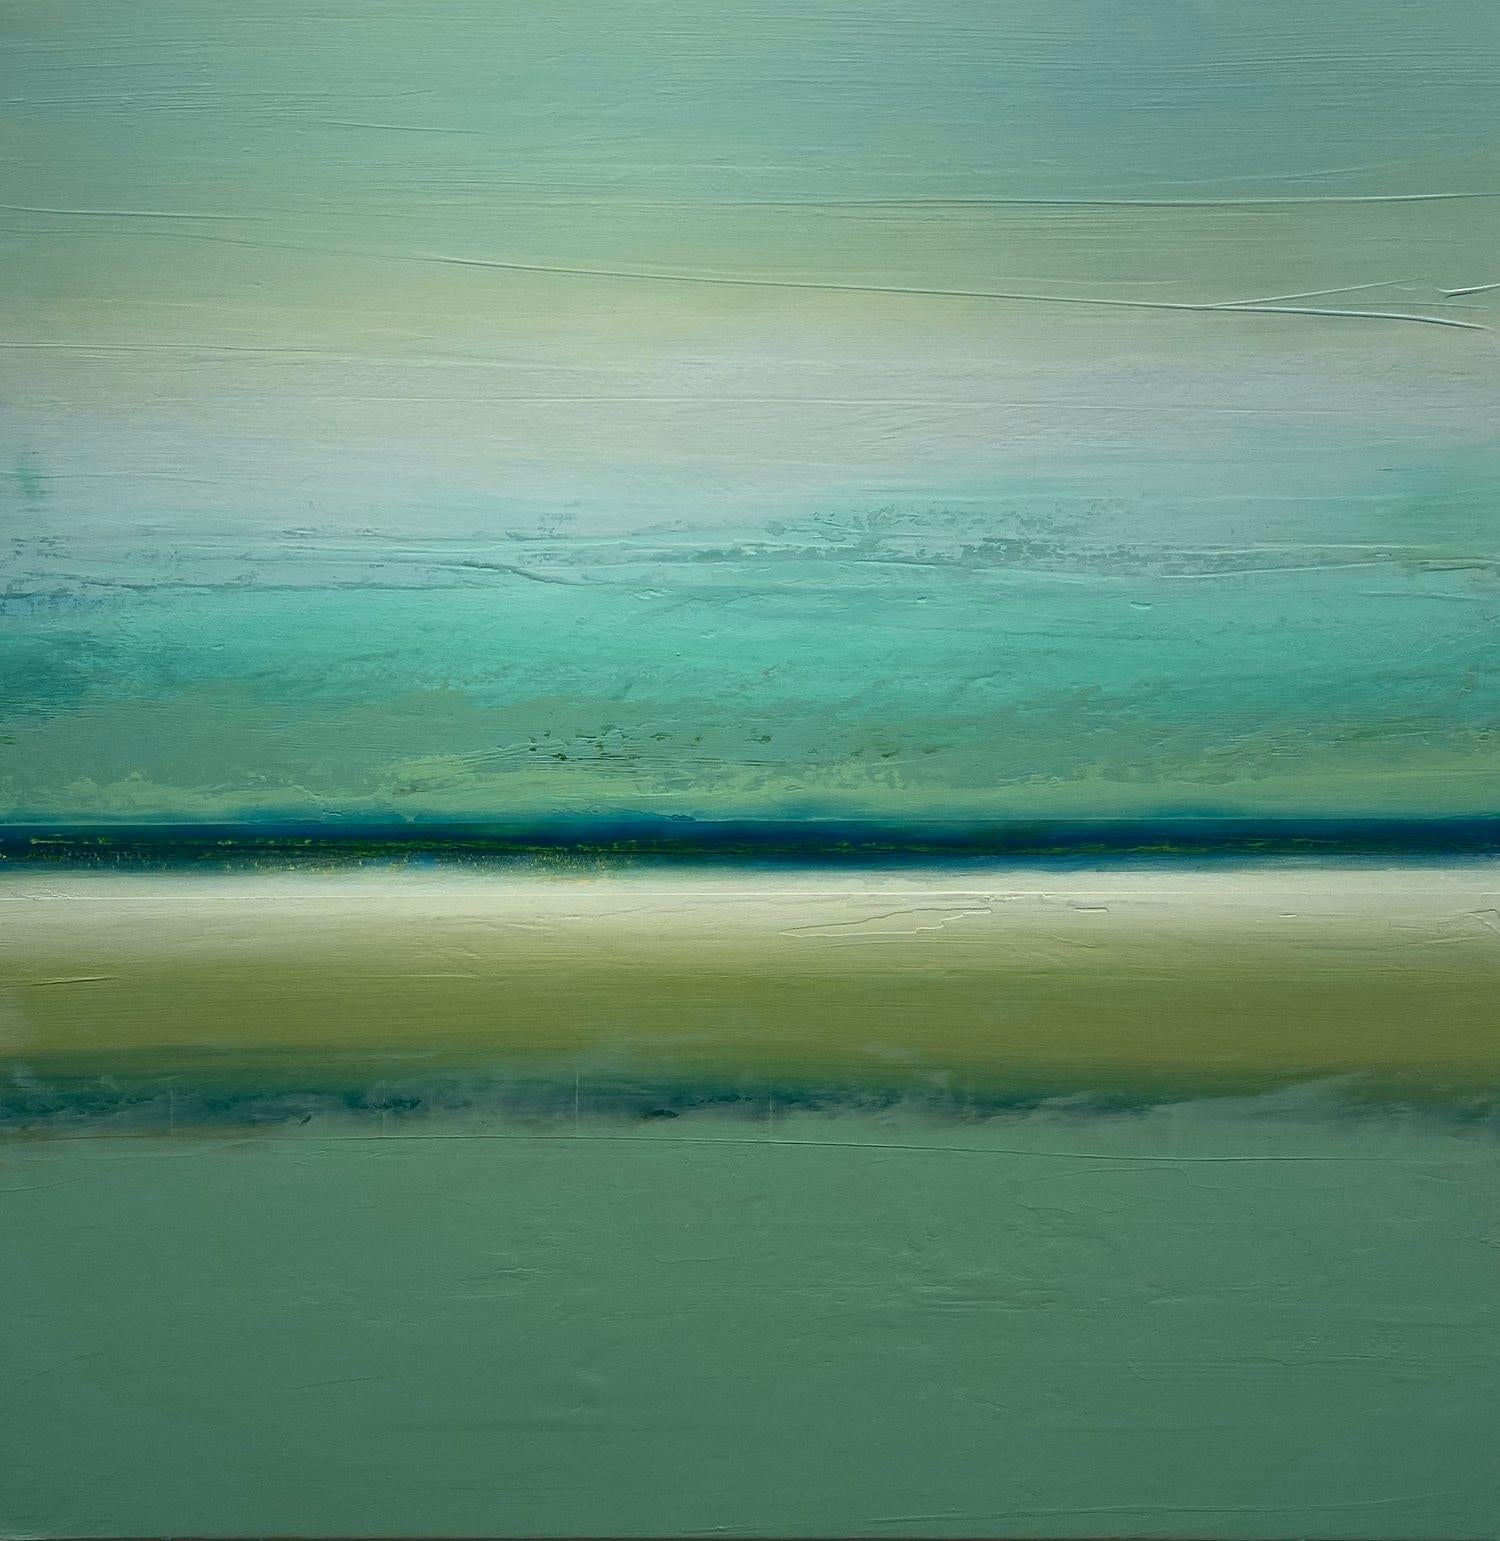 Katheryn Holt Landscape Painting - 'Tropic' Abstract Large Contemporary Seascape Mixed Media on Board 